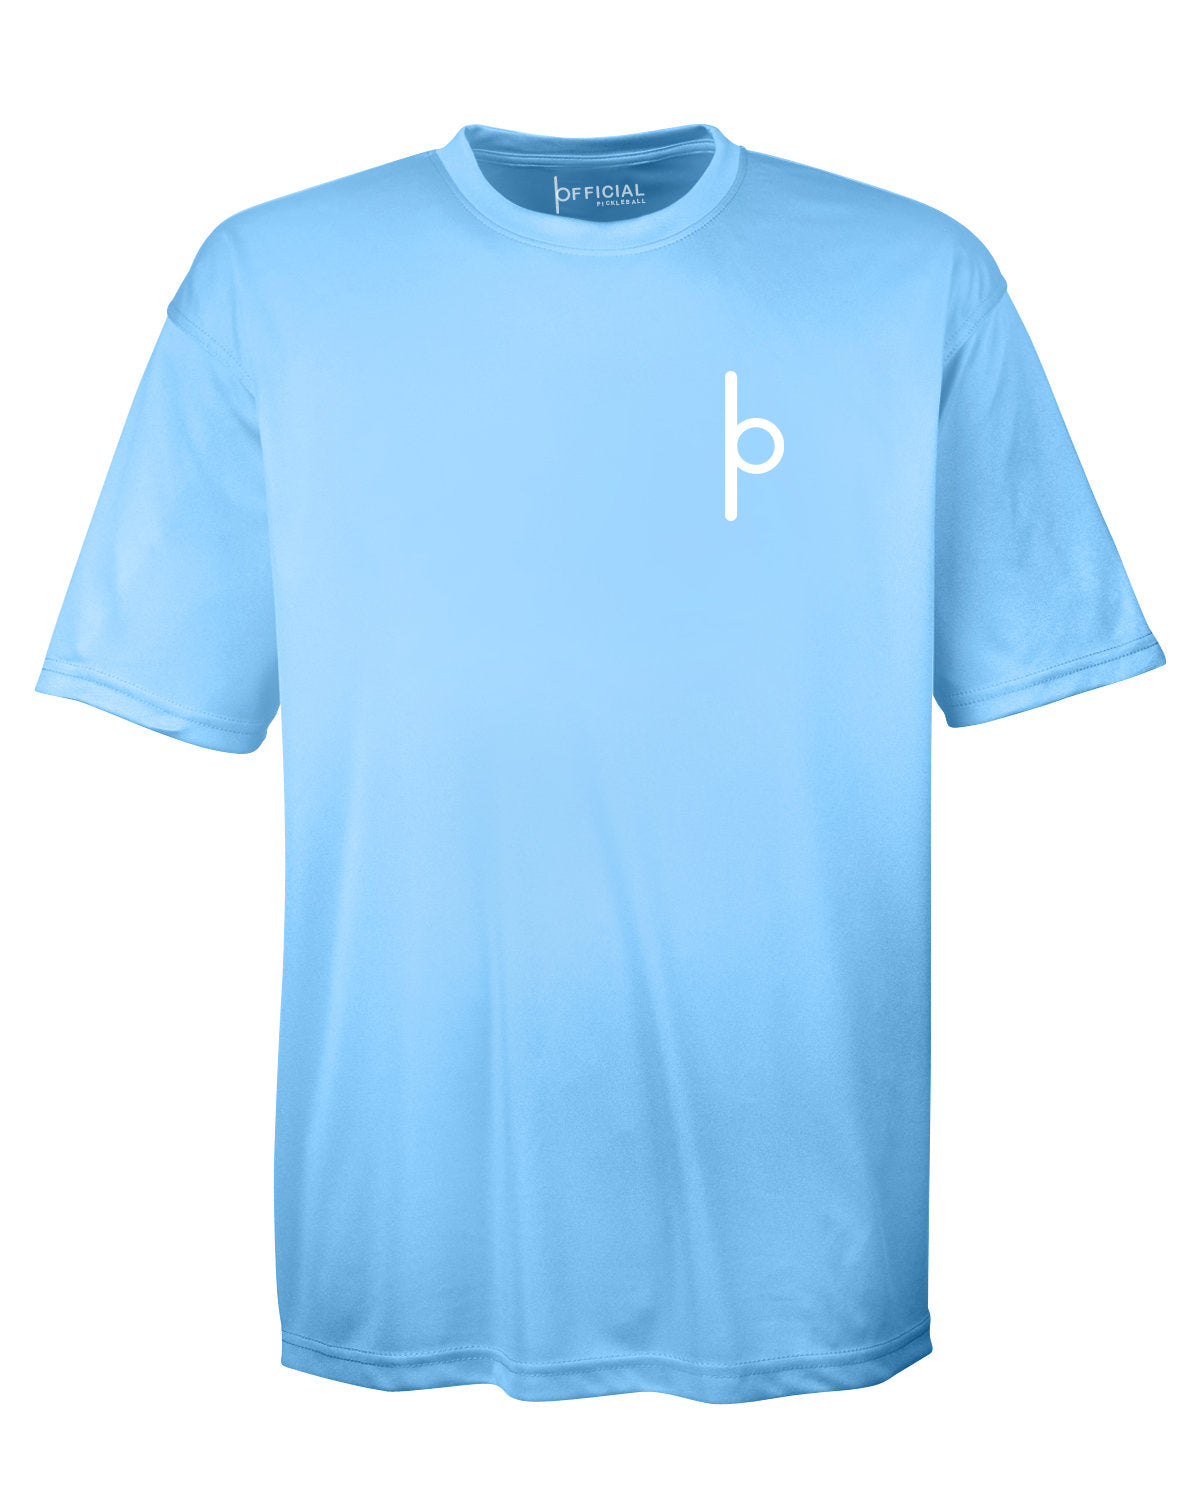 OFFICIAL Pickleball Performance Shirts